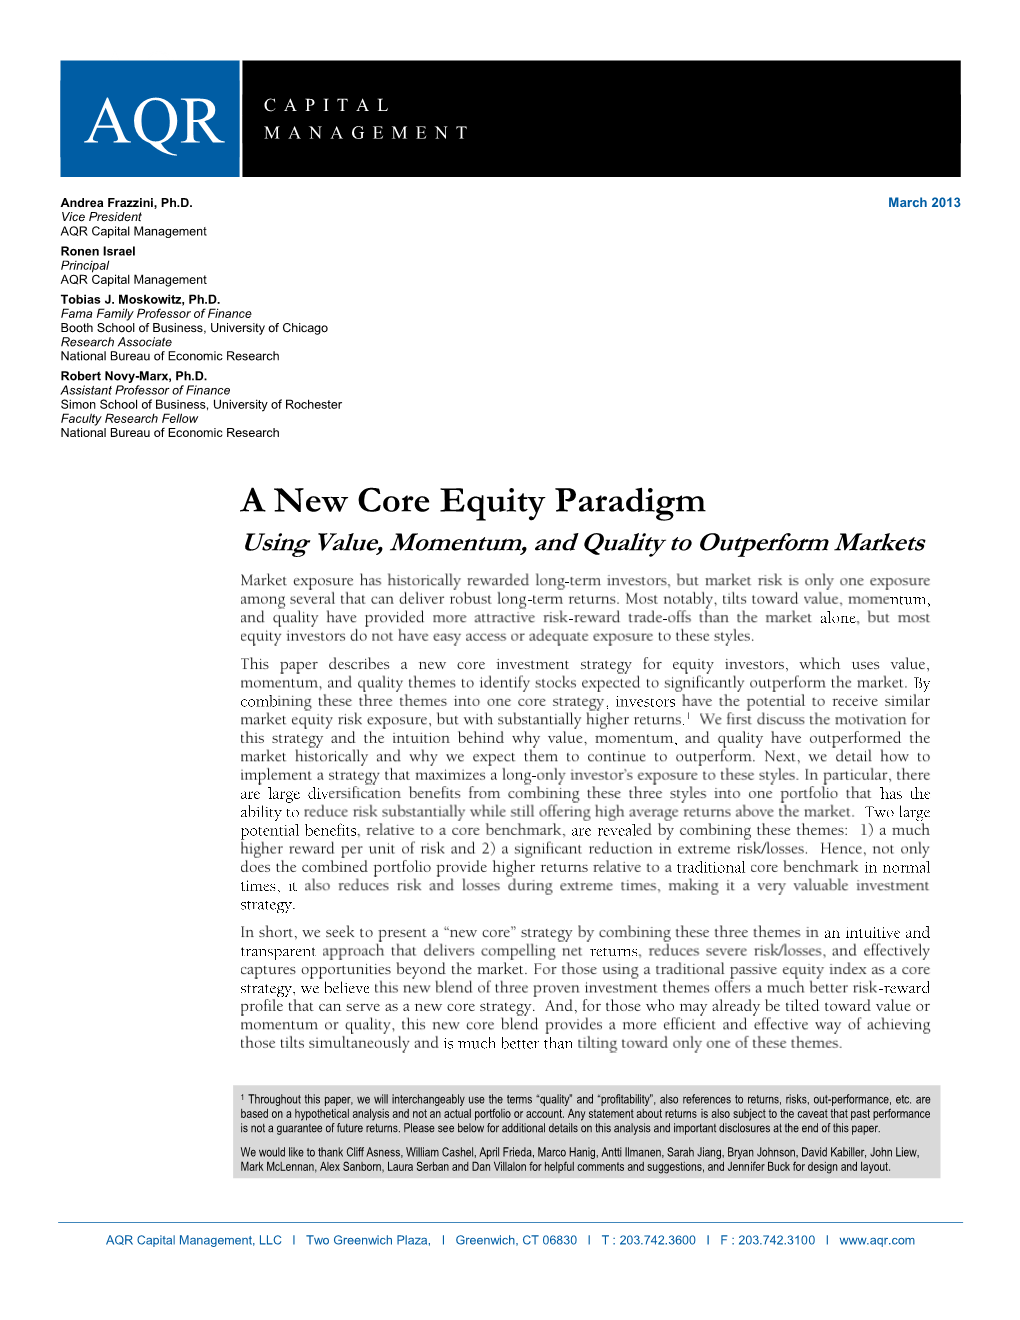 The Case for Core Equity